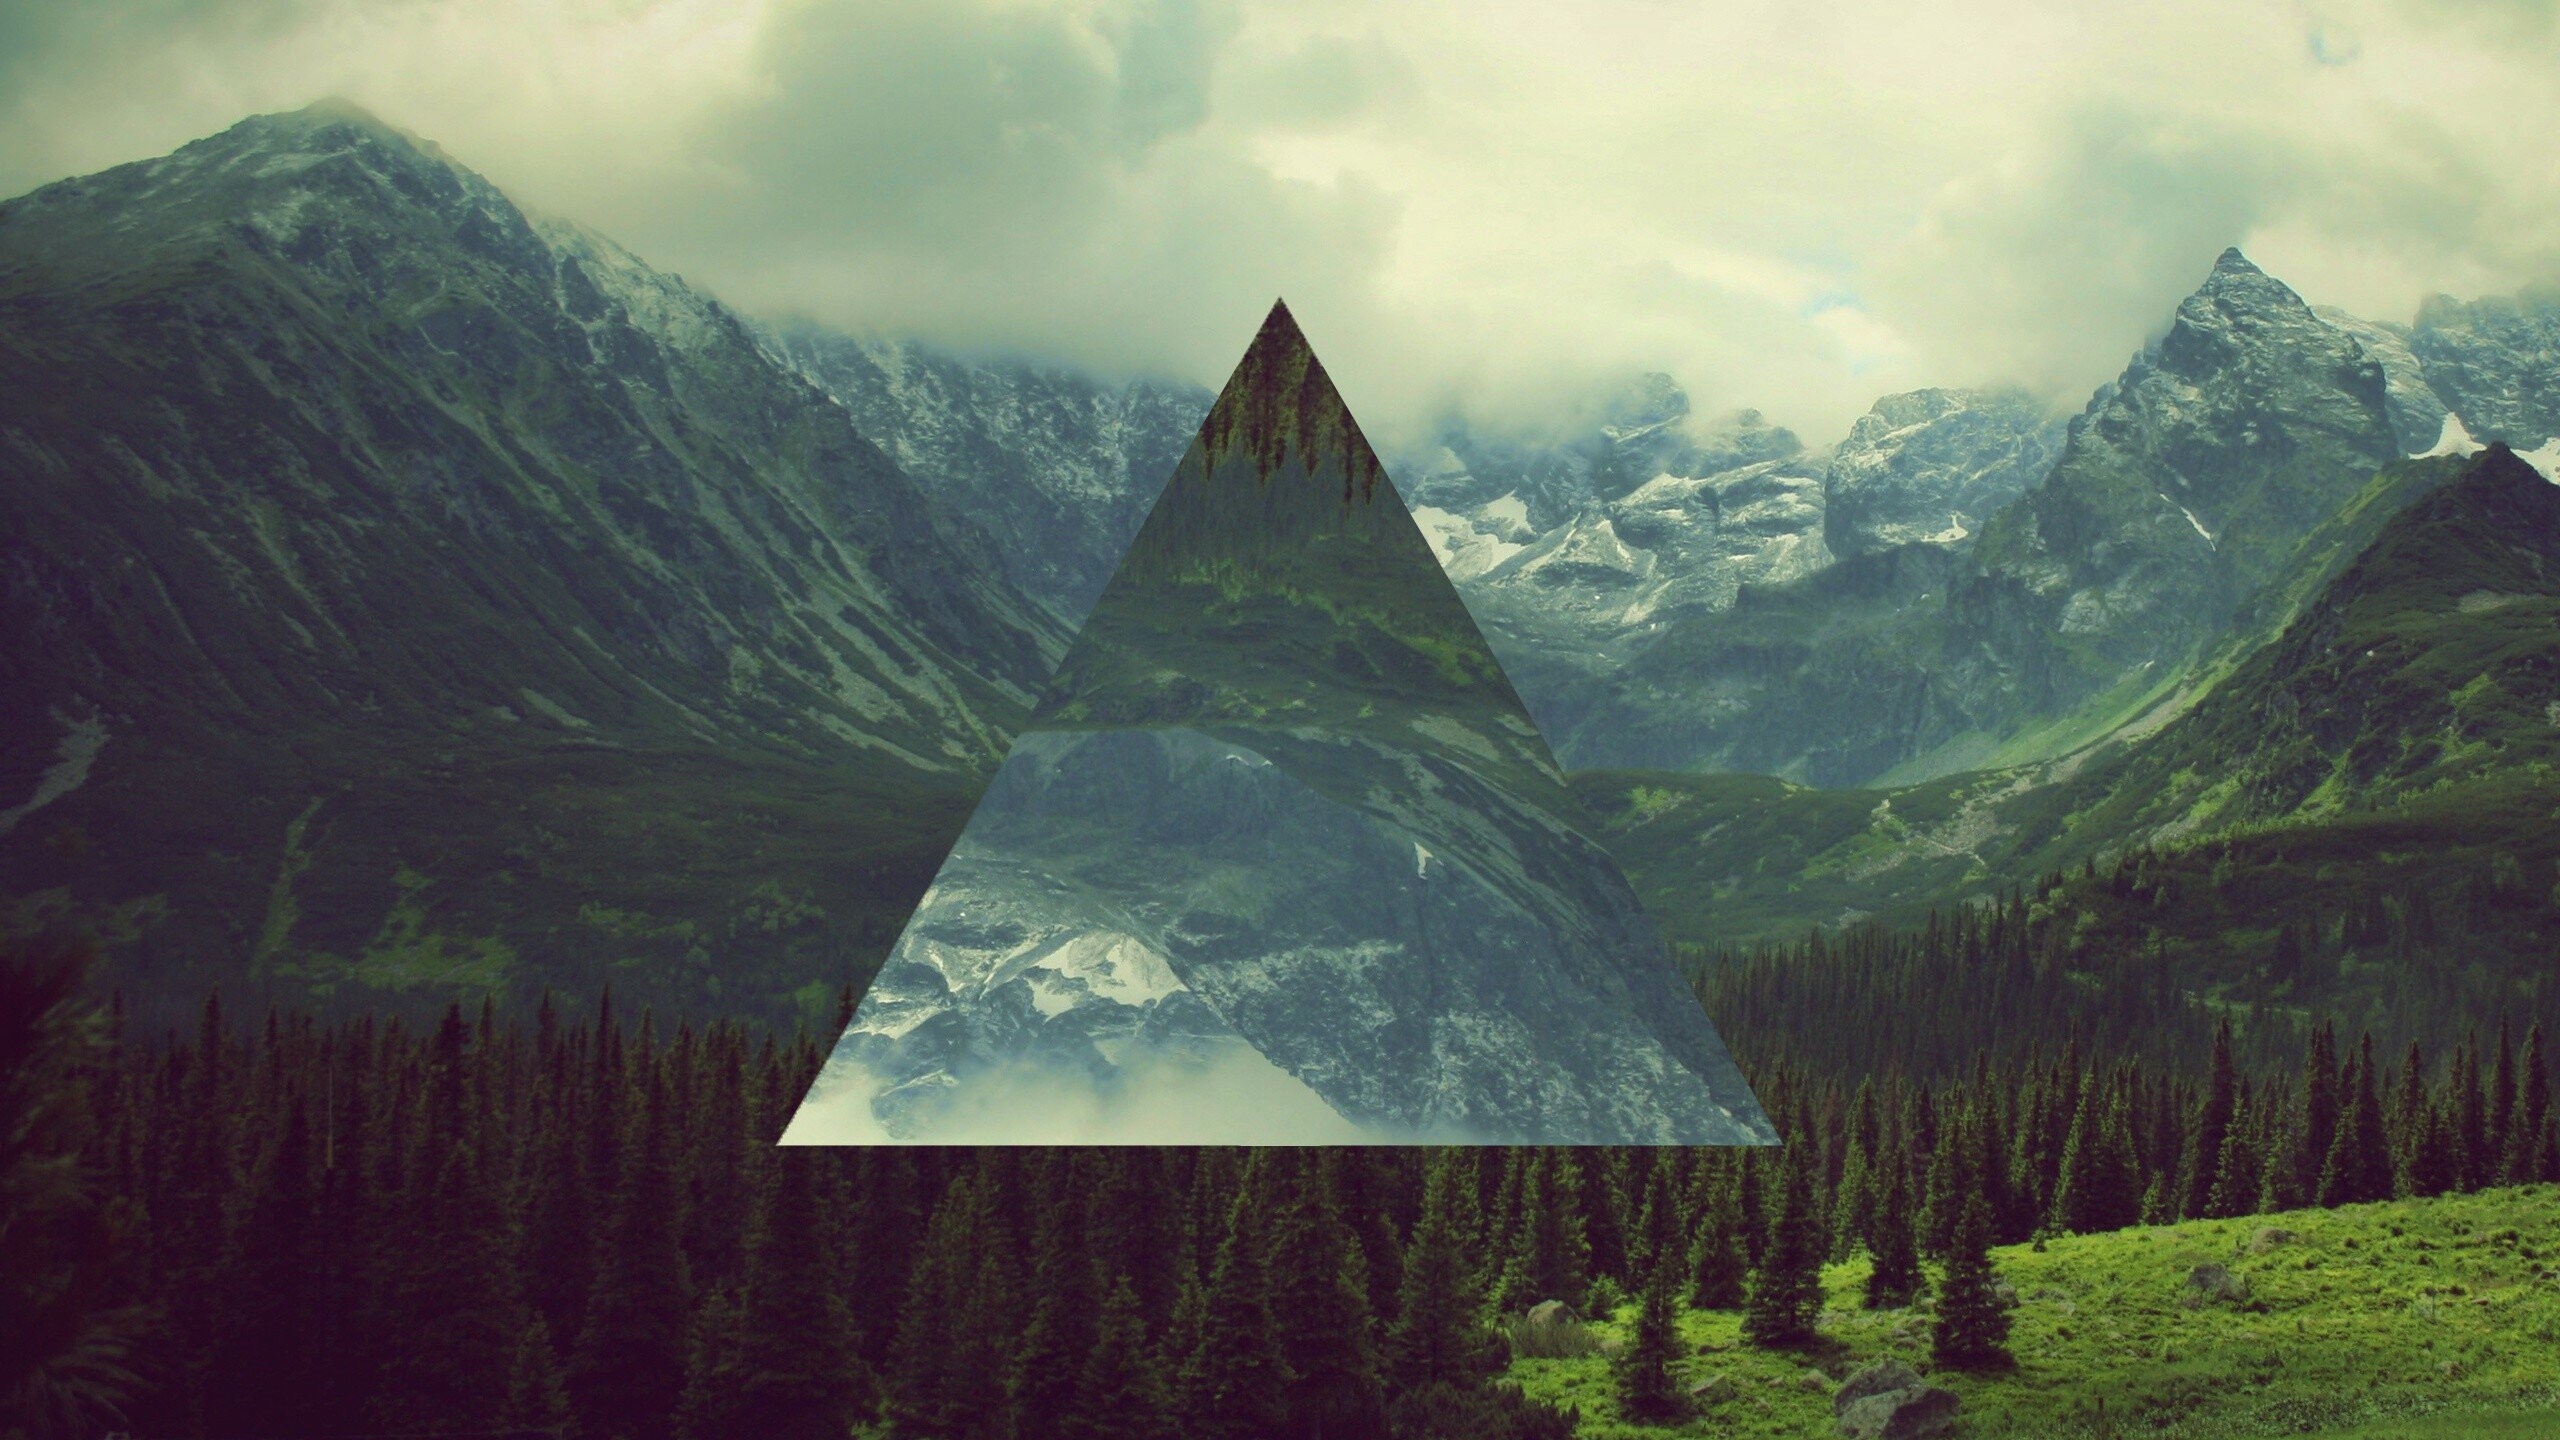 Triangle: A closed figure with three sides, Landscape, Forest. 2560x1440 HD Wallpaper.